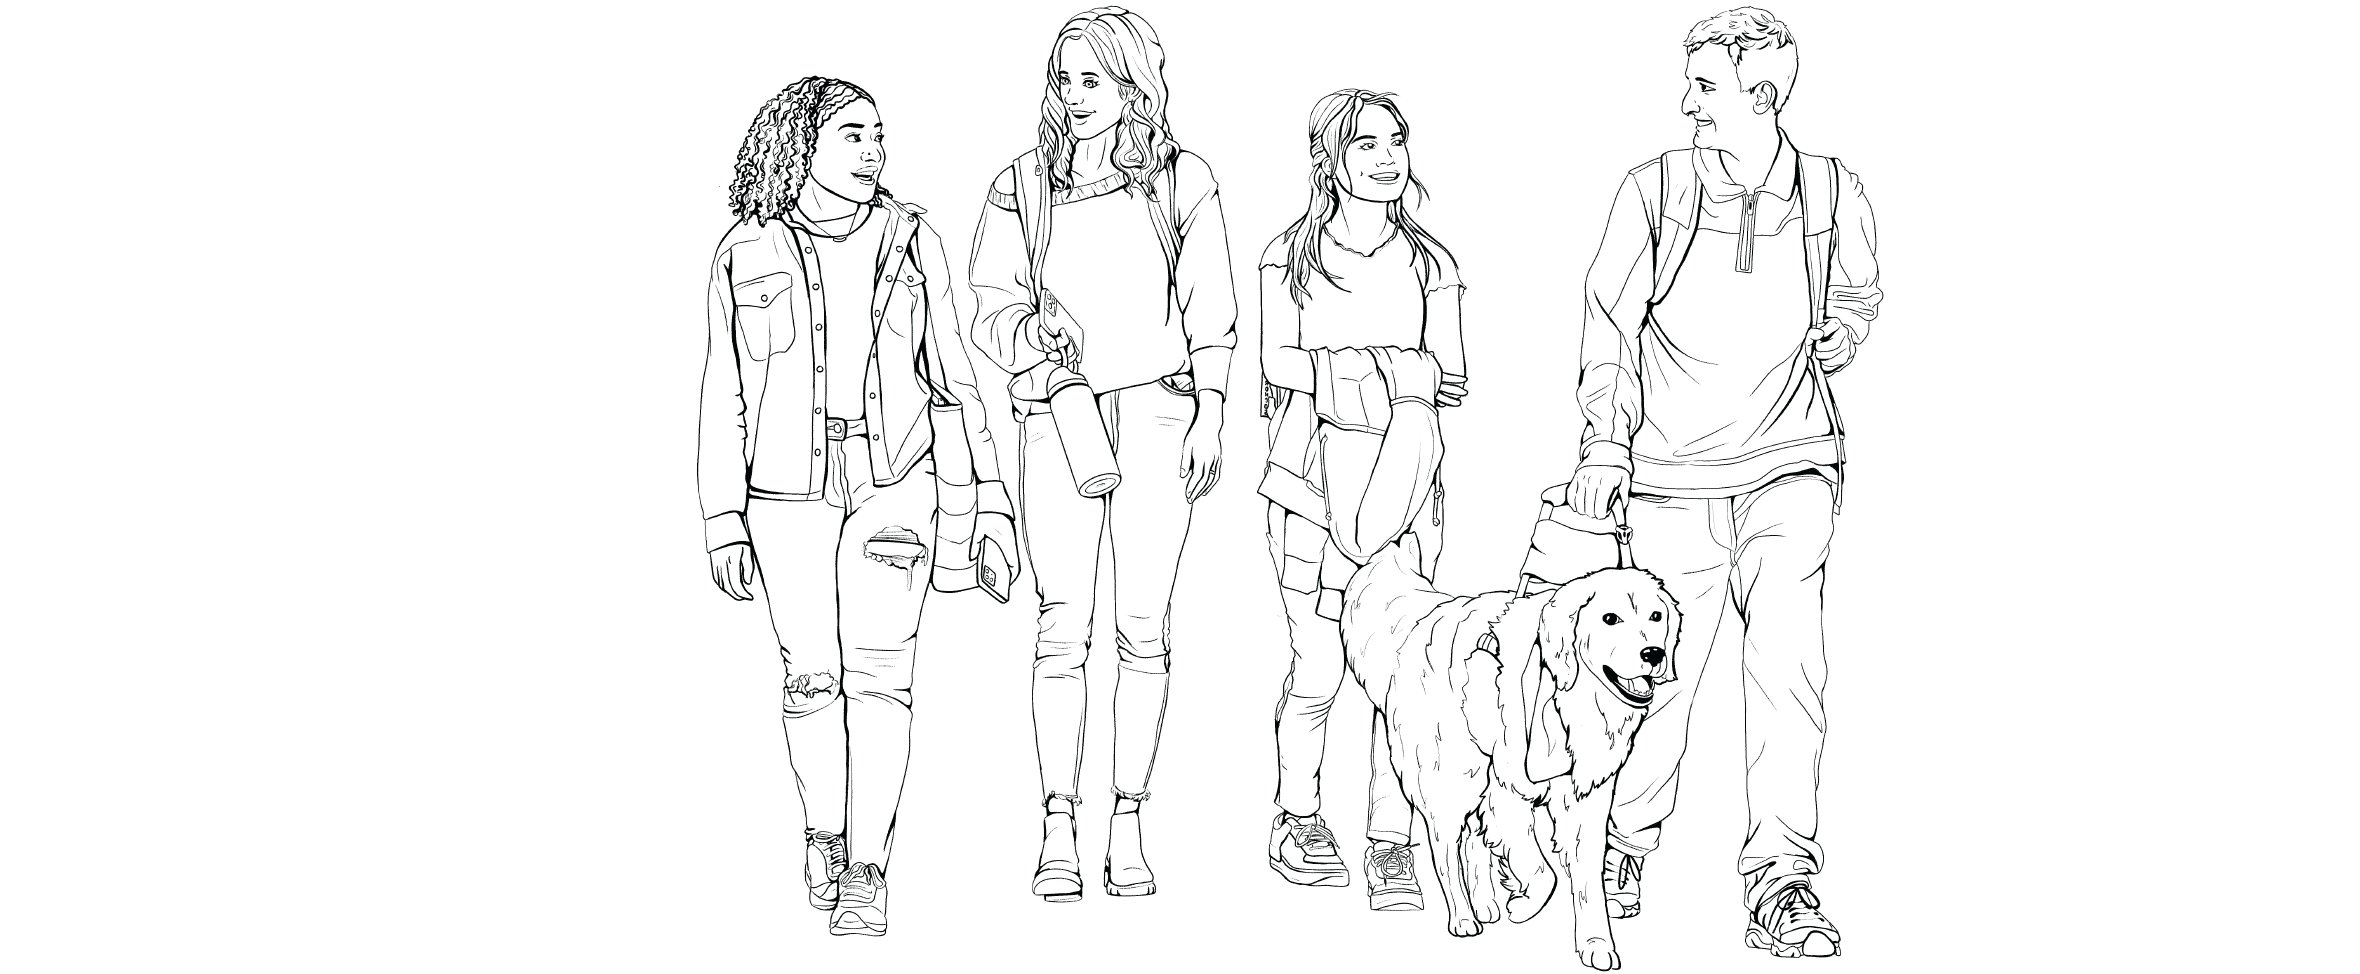 An illustration with four students and a service dog